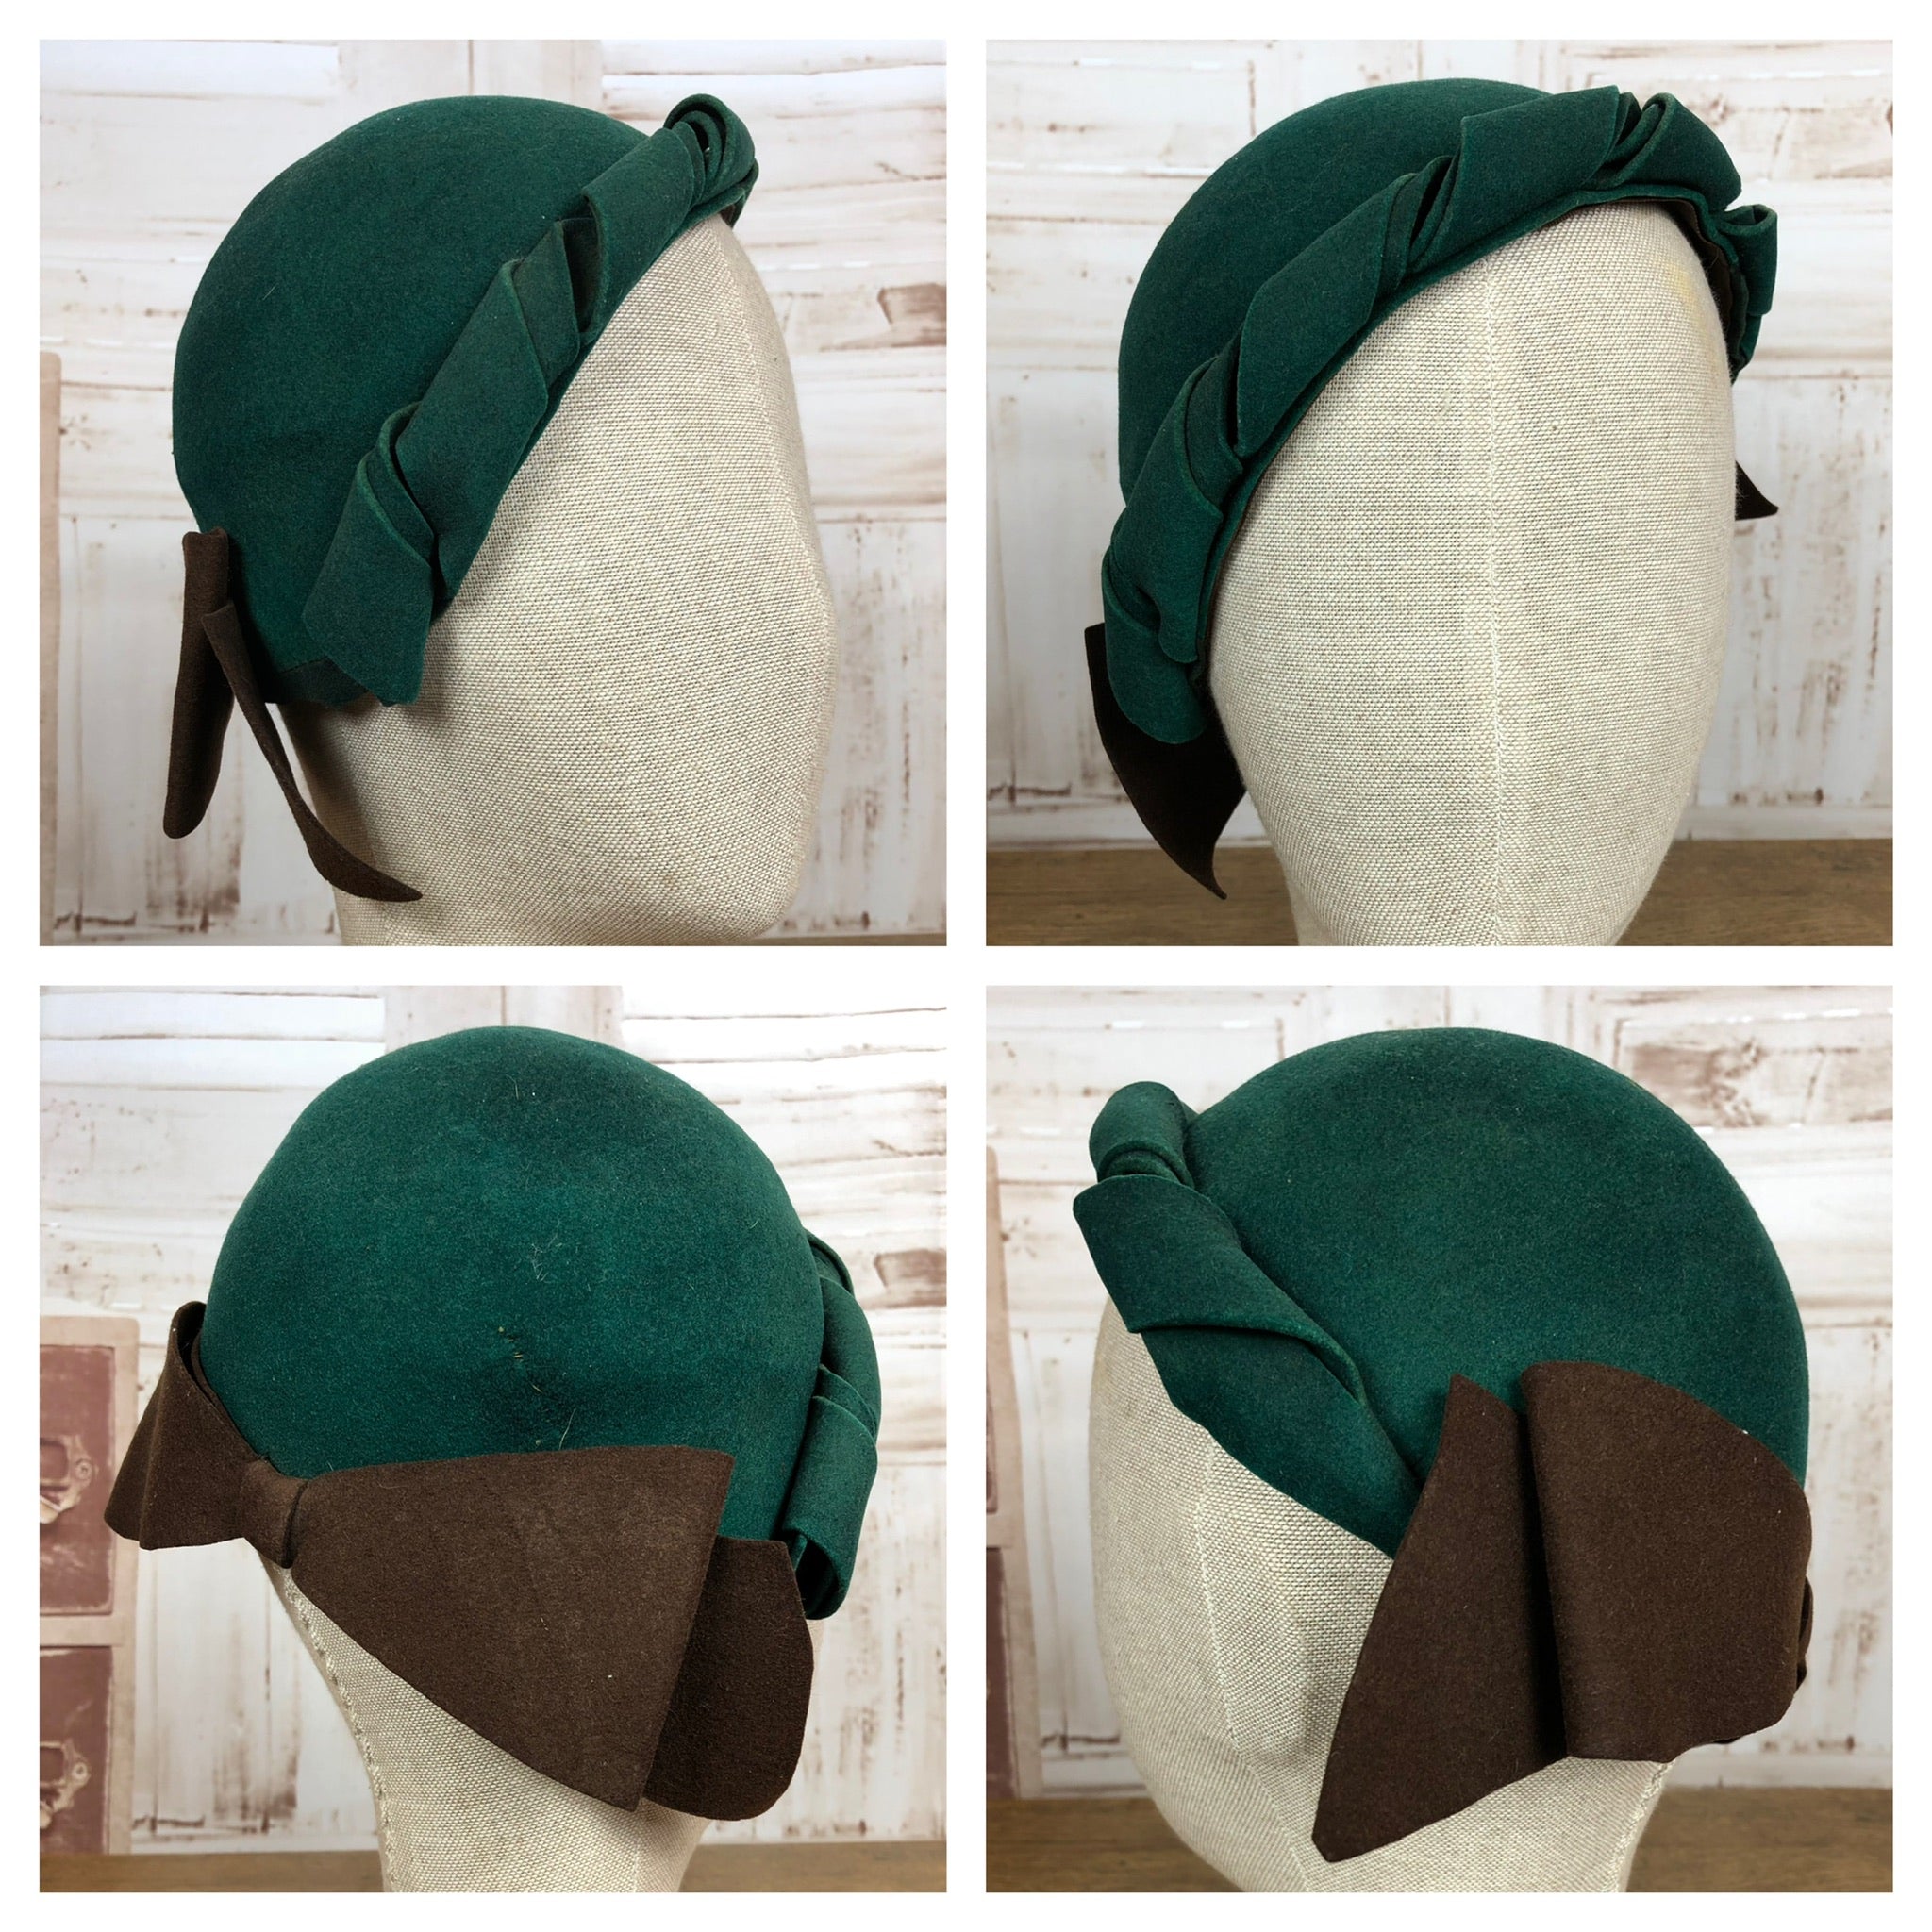 Super Cute Original 1930s Vintage Forest Green Cap With Rolled Brim